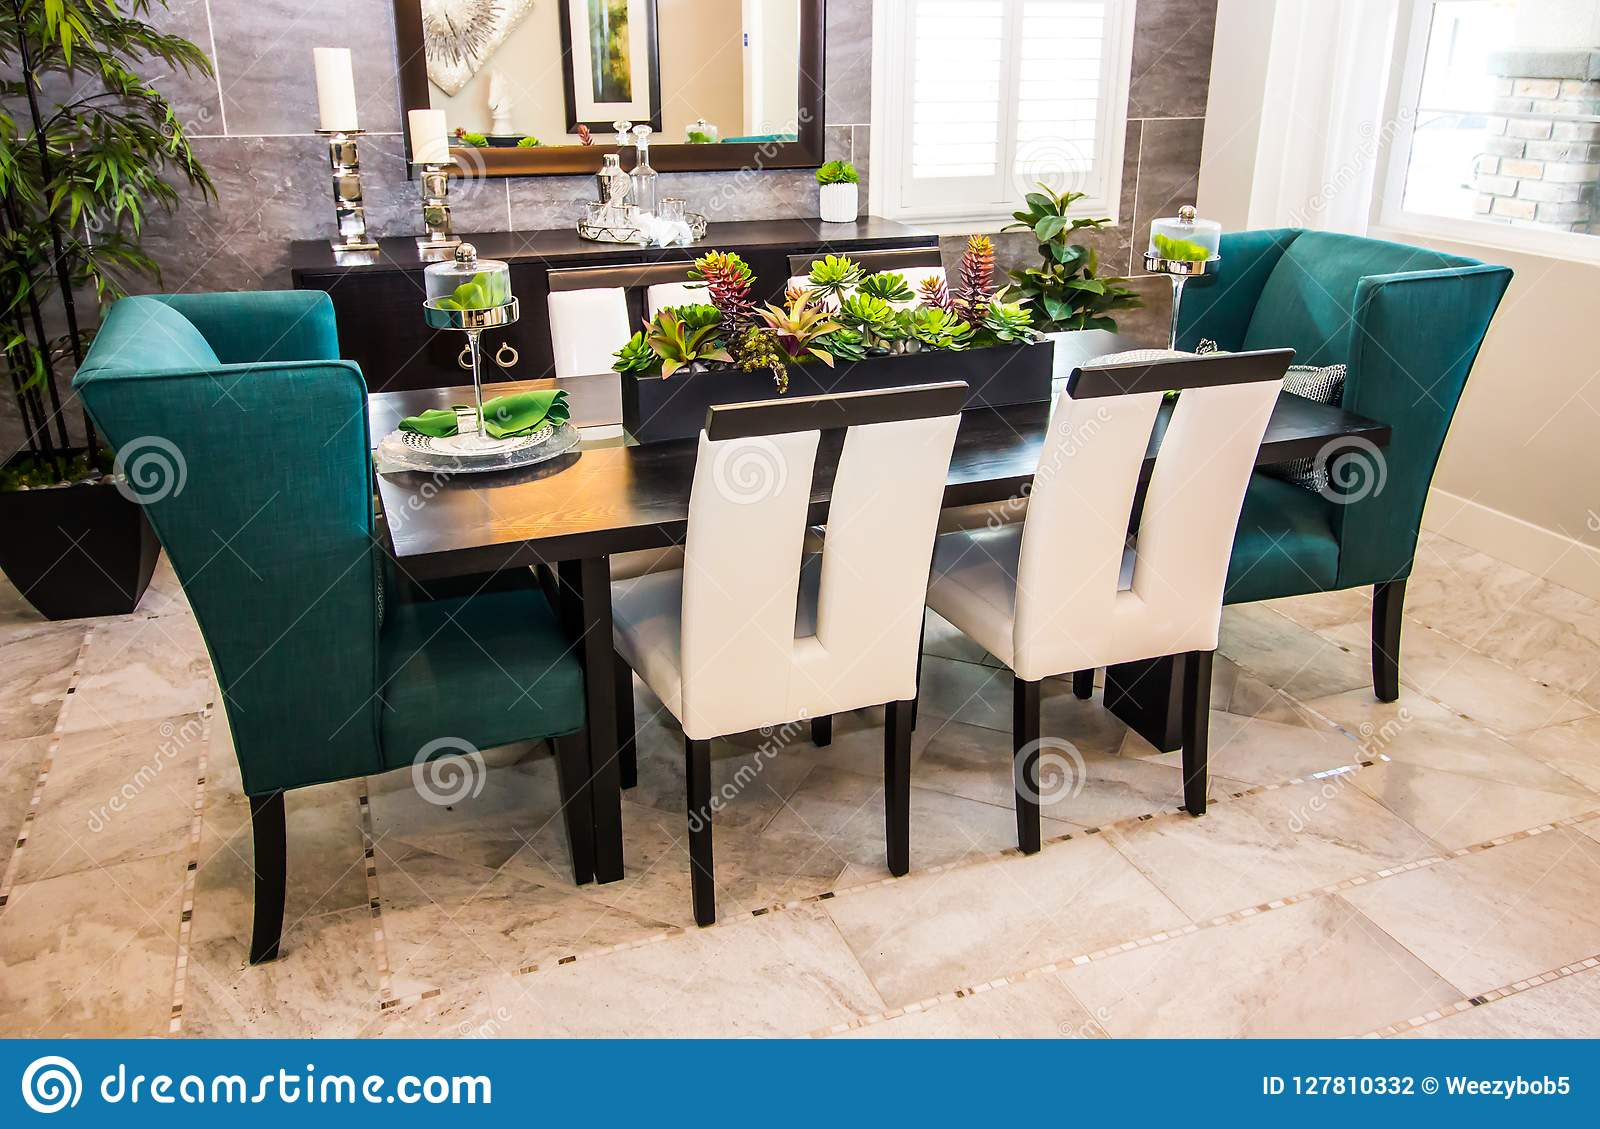 Modern Dining Room Table Hutch Chairs Stock Photo Image for dimensions 1600 X 1129